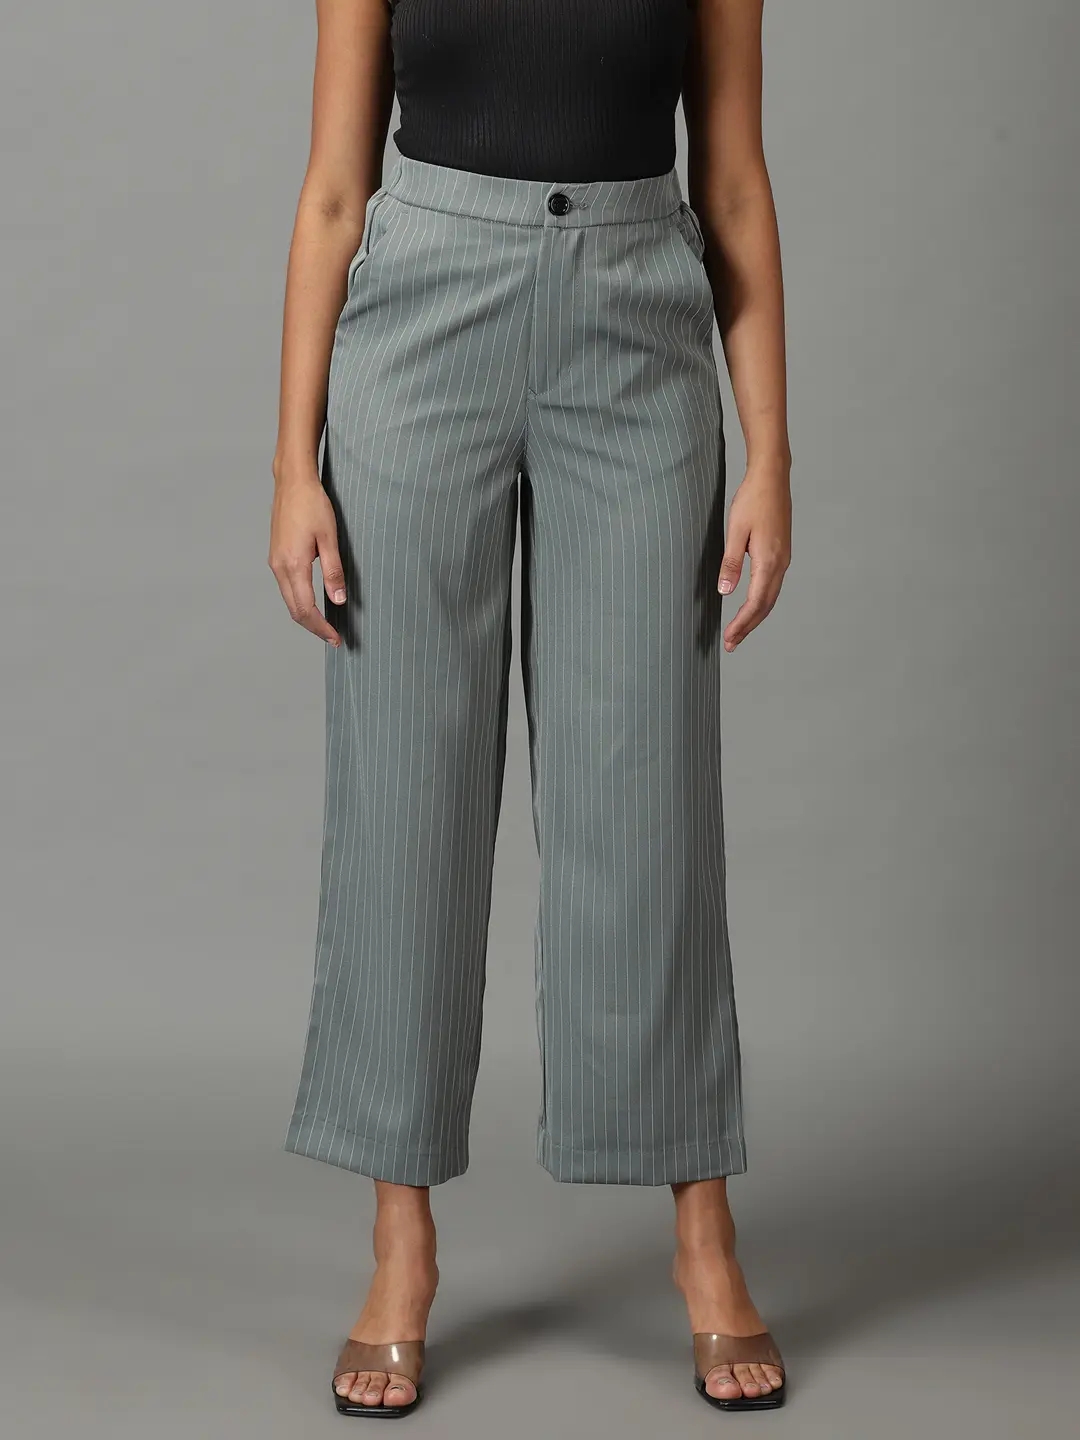 Buy AND Navy Striped Polyester Women's Formal Wear Pants | Shoppers Stop